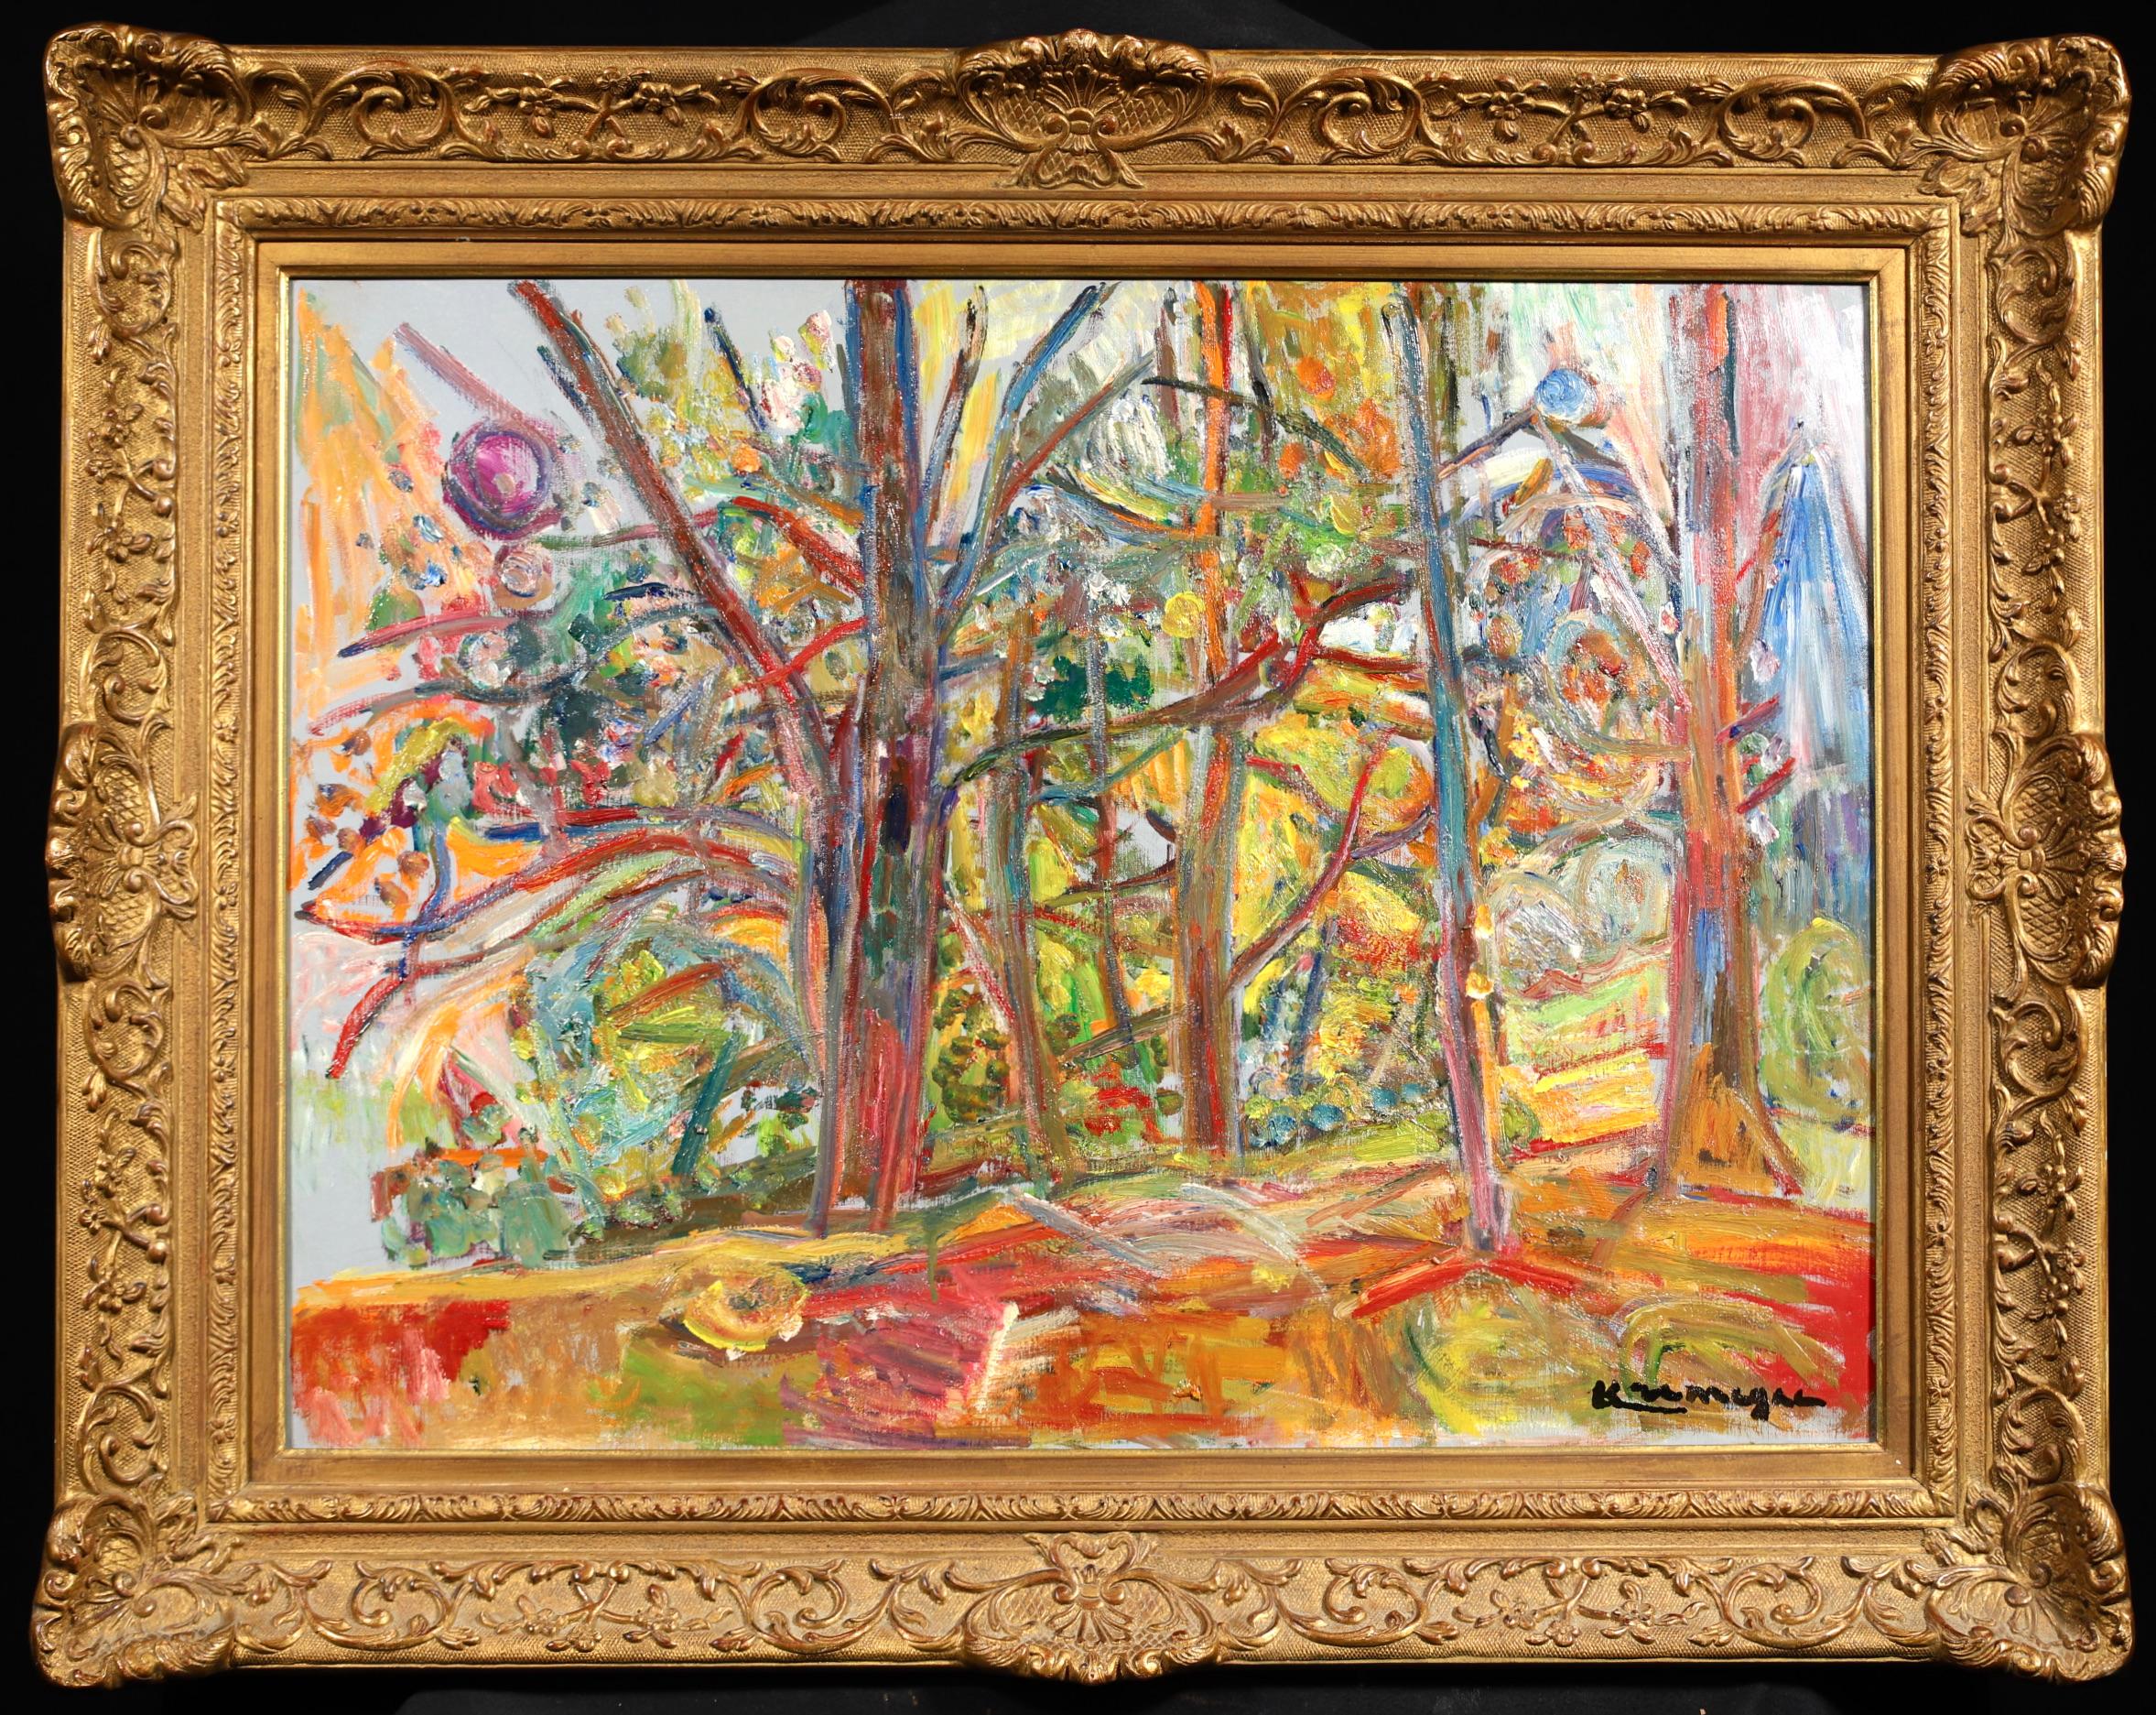 Signed expressionist landscape oil on canvas circa 1950 by Lithuanian-French painter Pinchus Kremegne. This stunning and vibrantly coloured piece trees in Ceret in the Pyrenees in the South of France.

Signature:
Signed lower right and stamped with